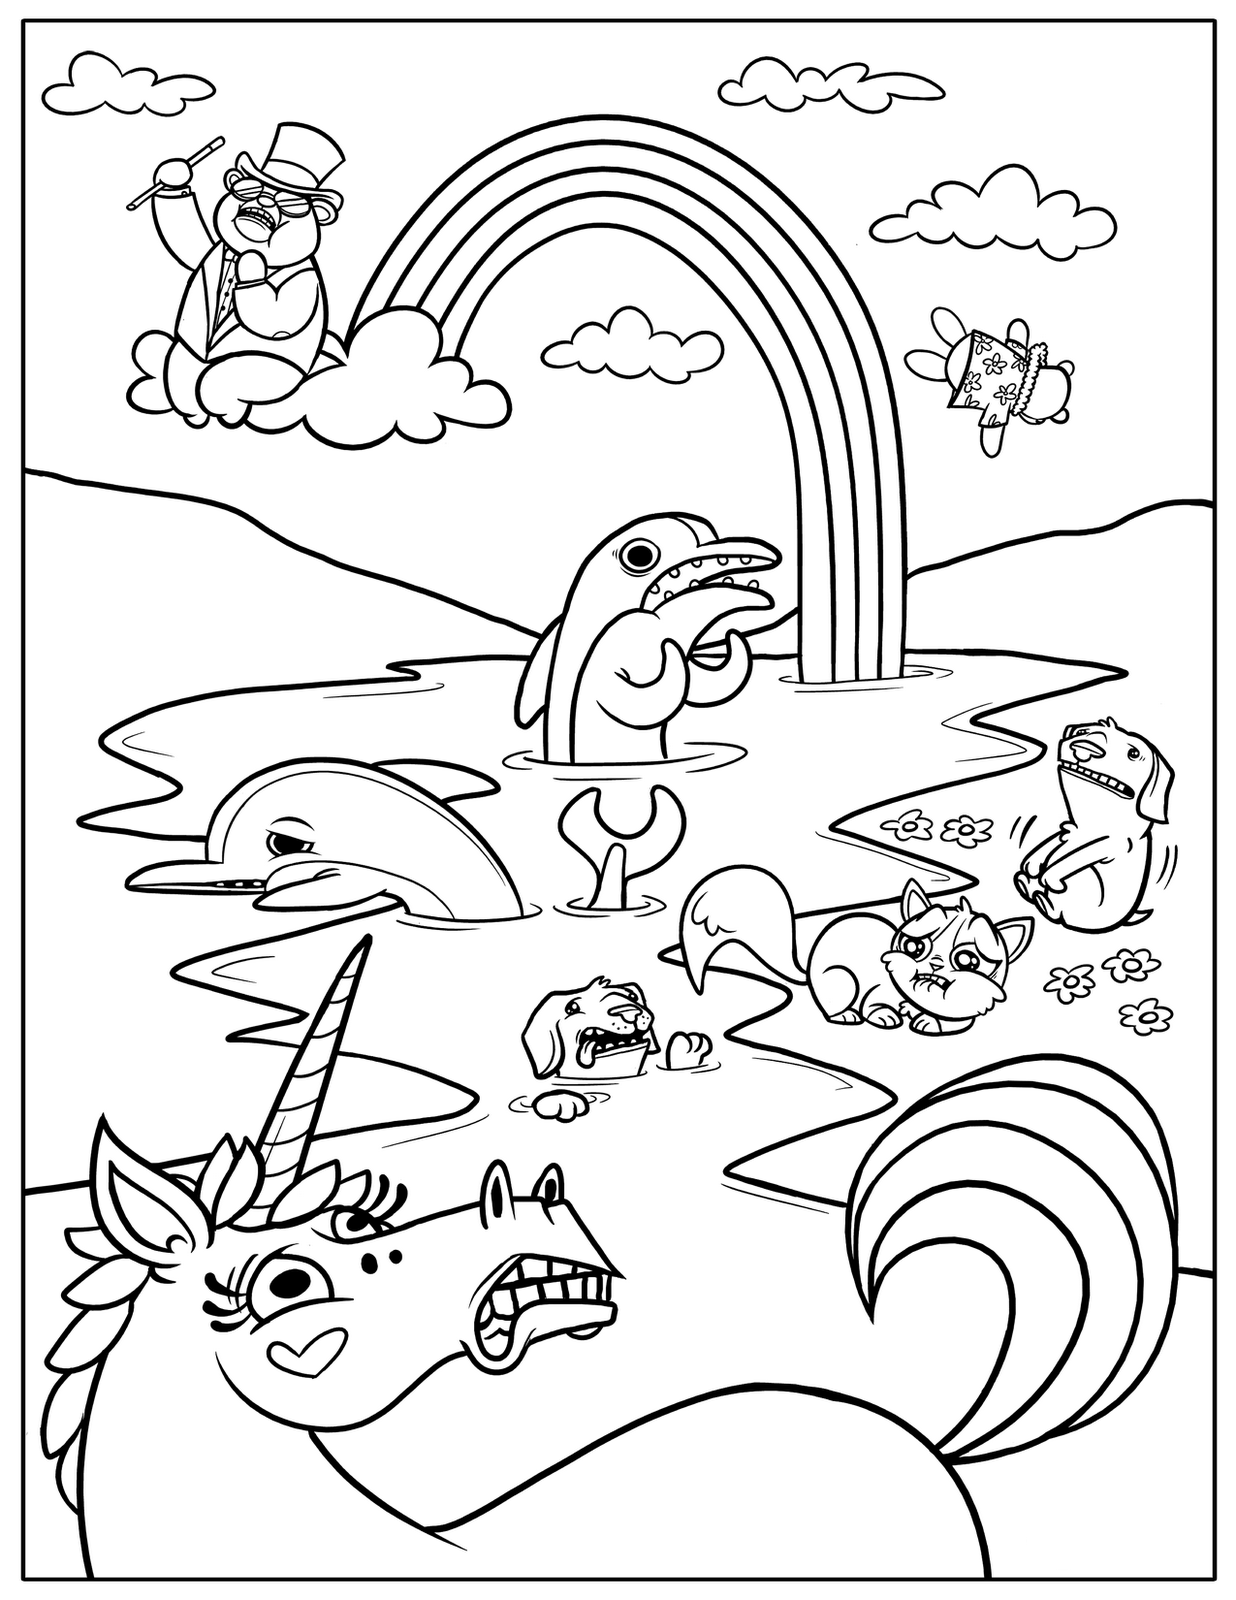 Download Free Printable Rainbow Coloring Pages For Kids